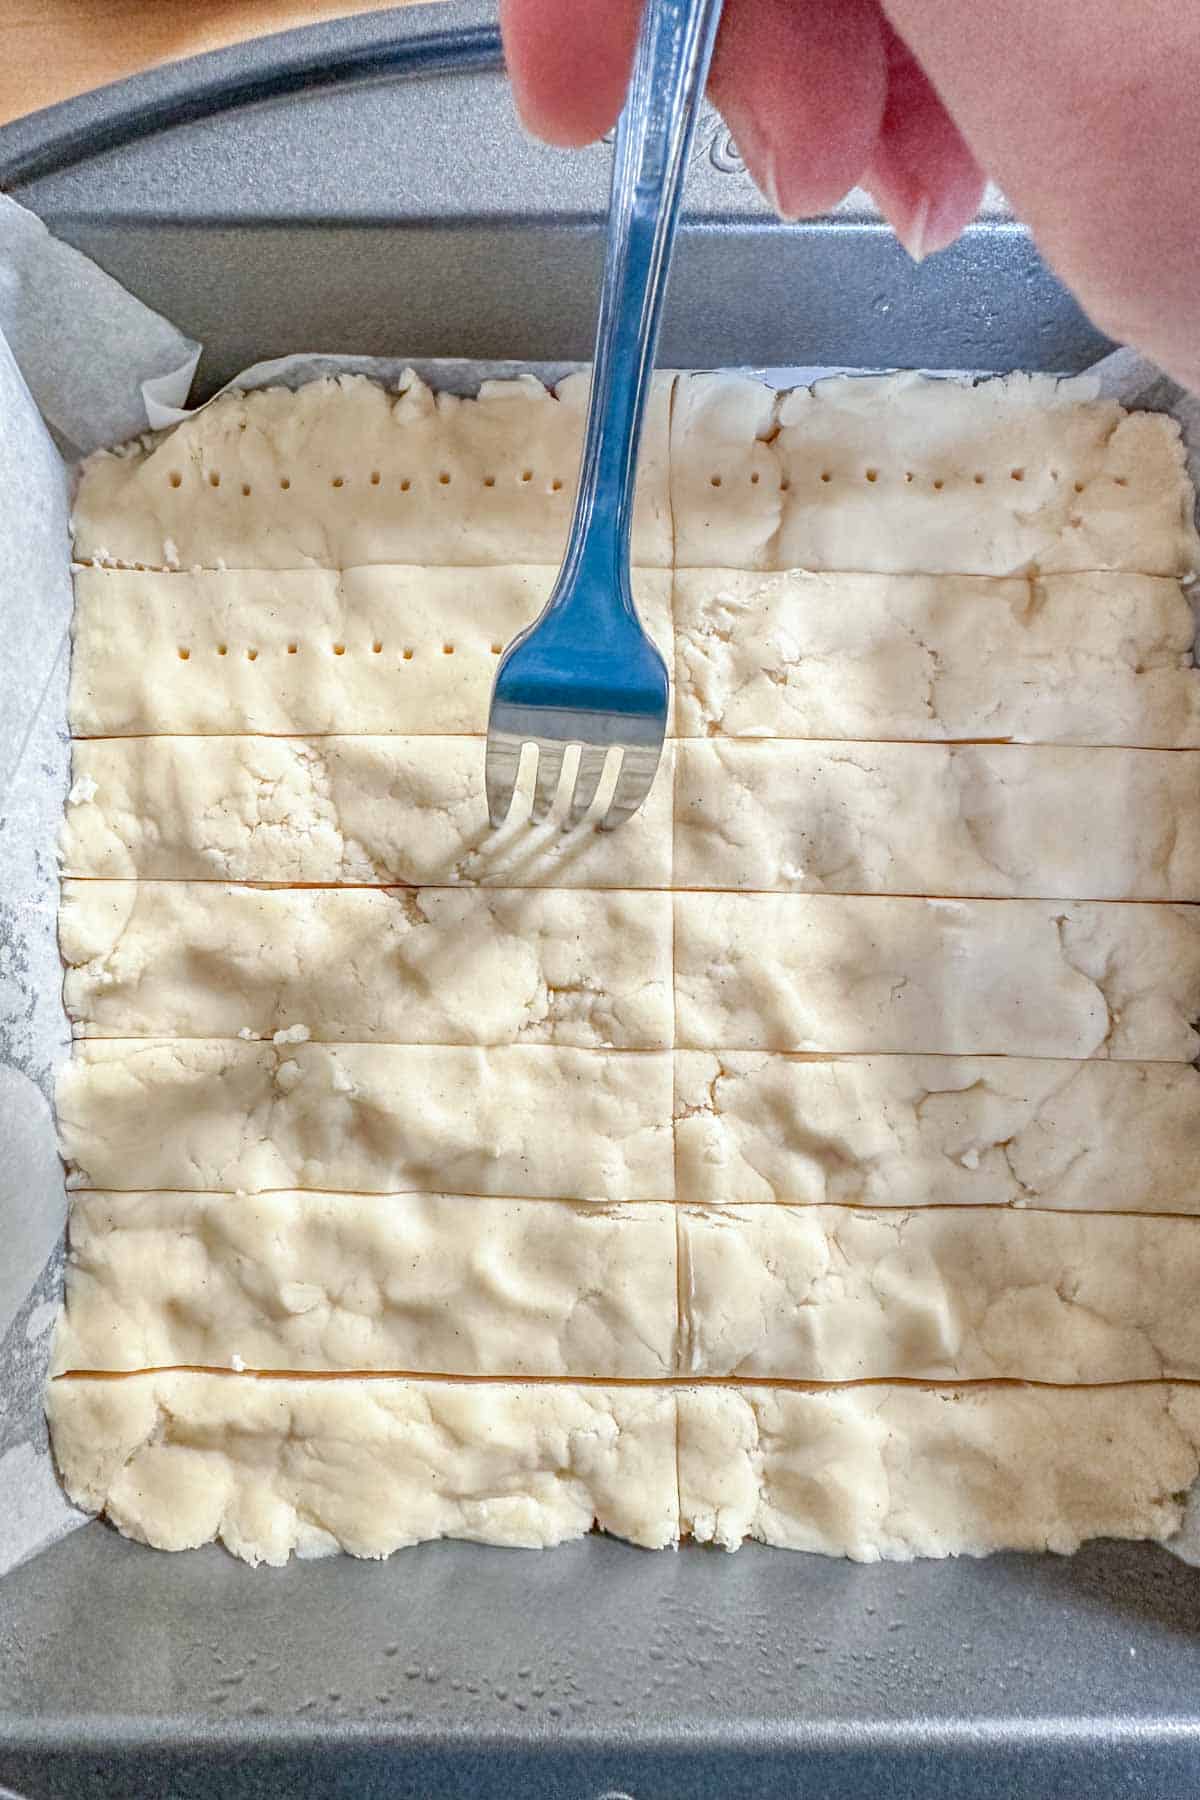 Using a fork to dock shortbread cookie dough.